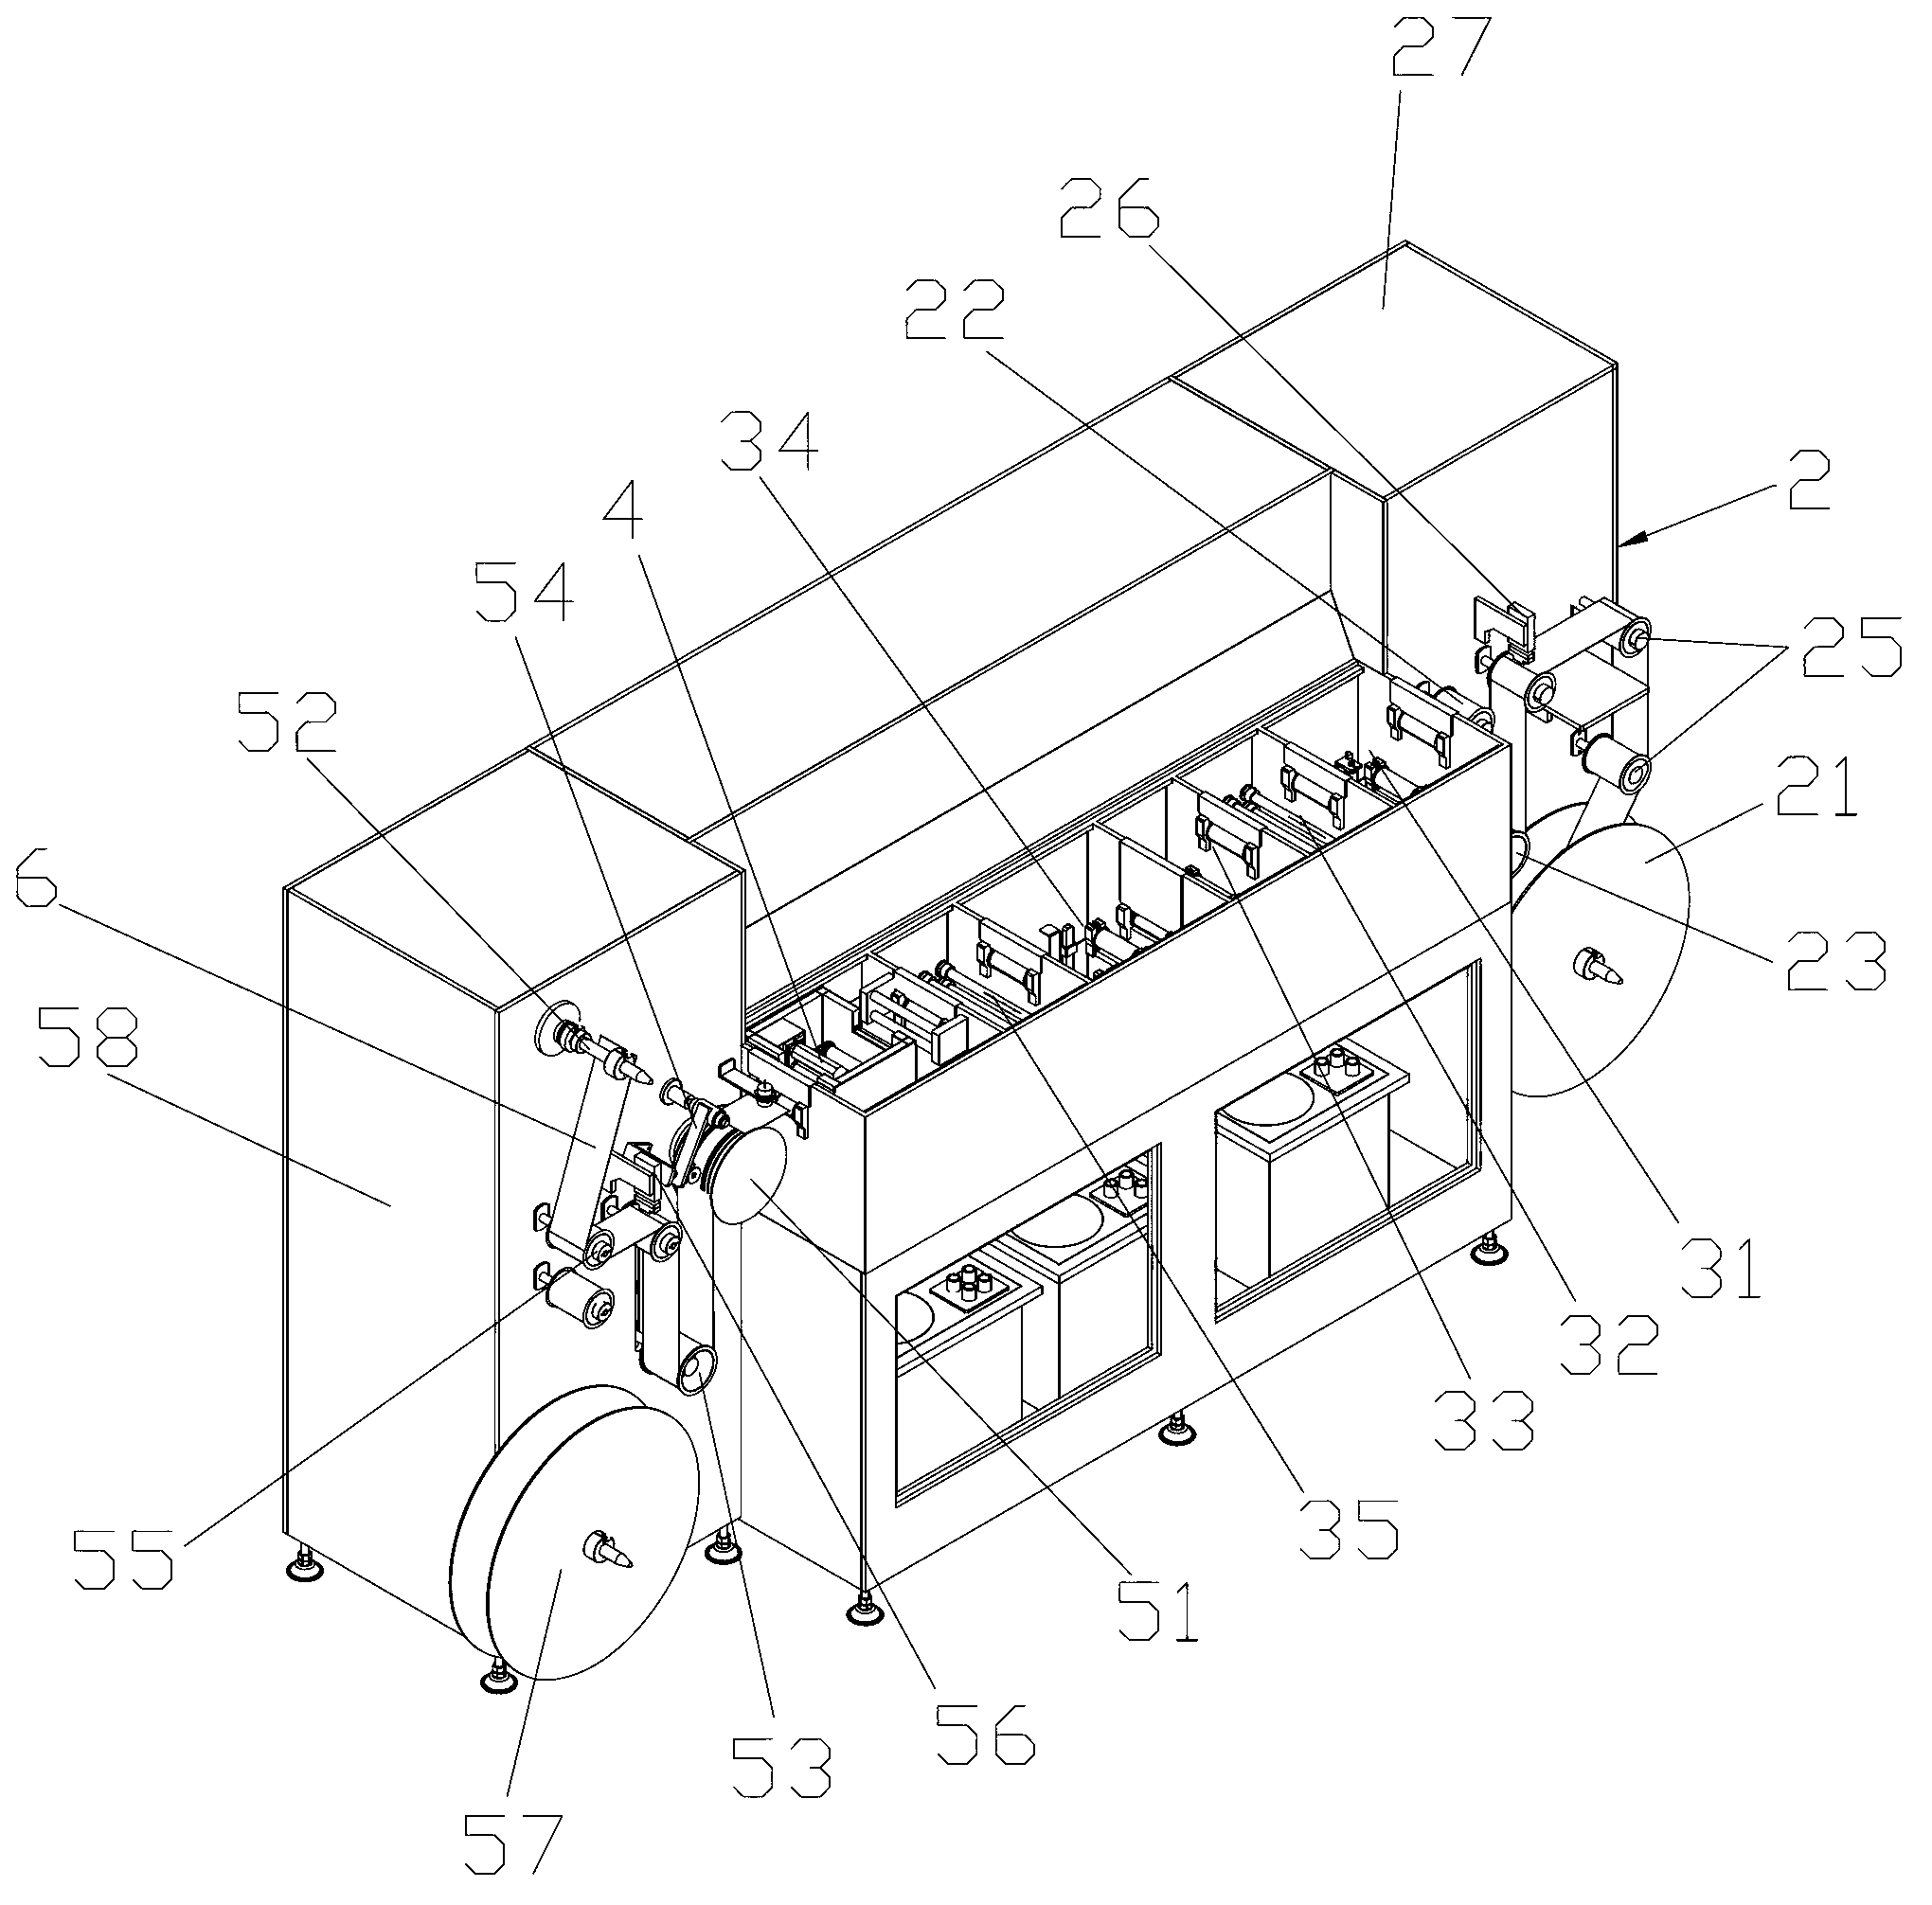 Flexible carrier sheet electroplating device